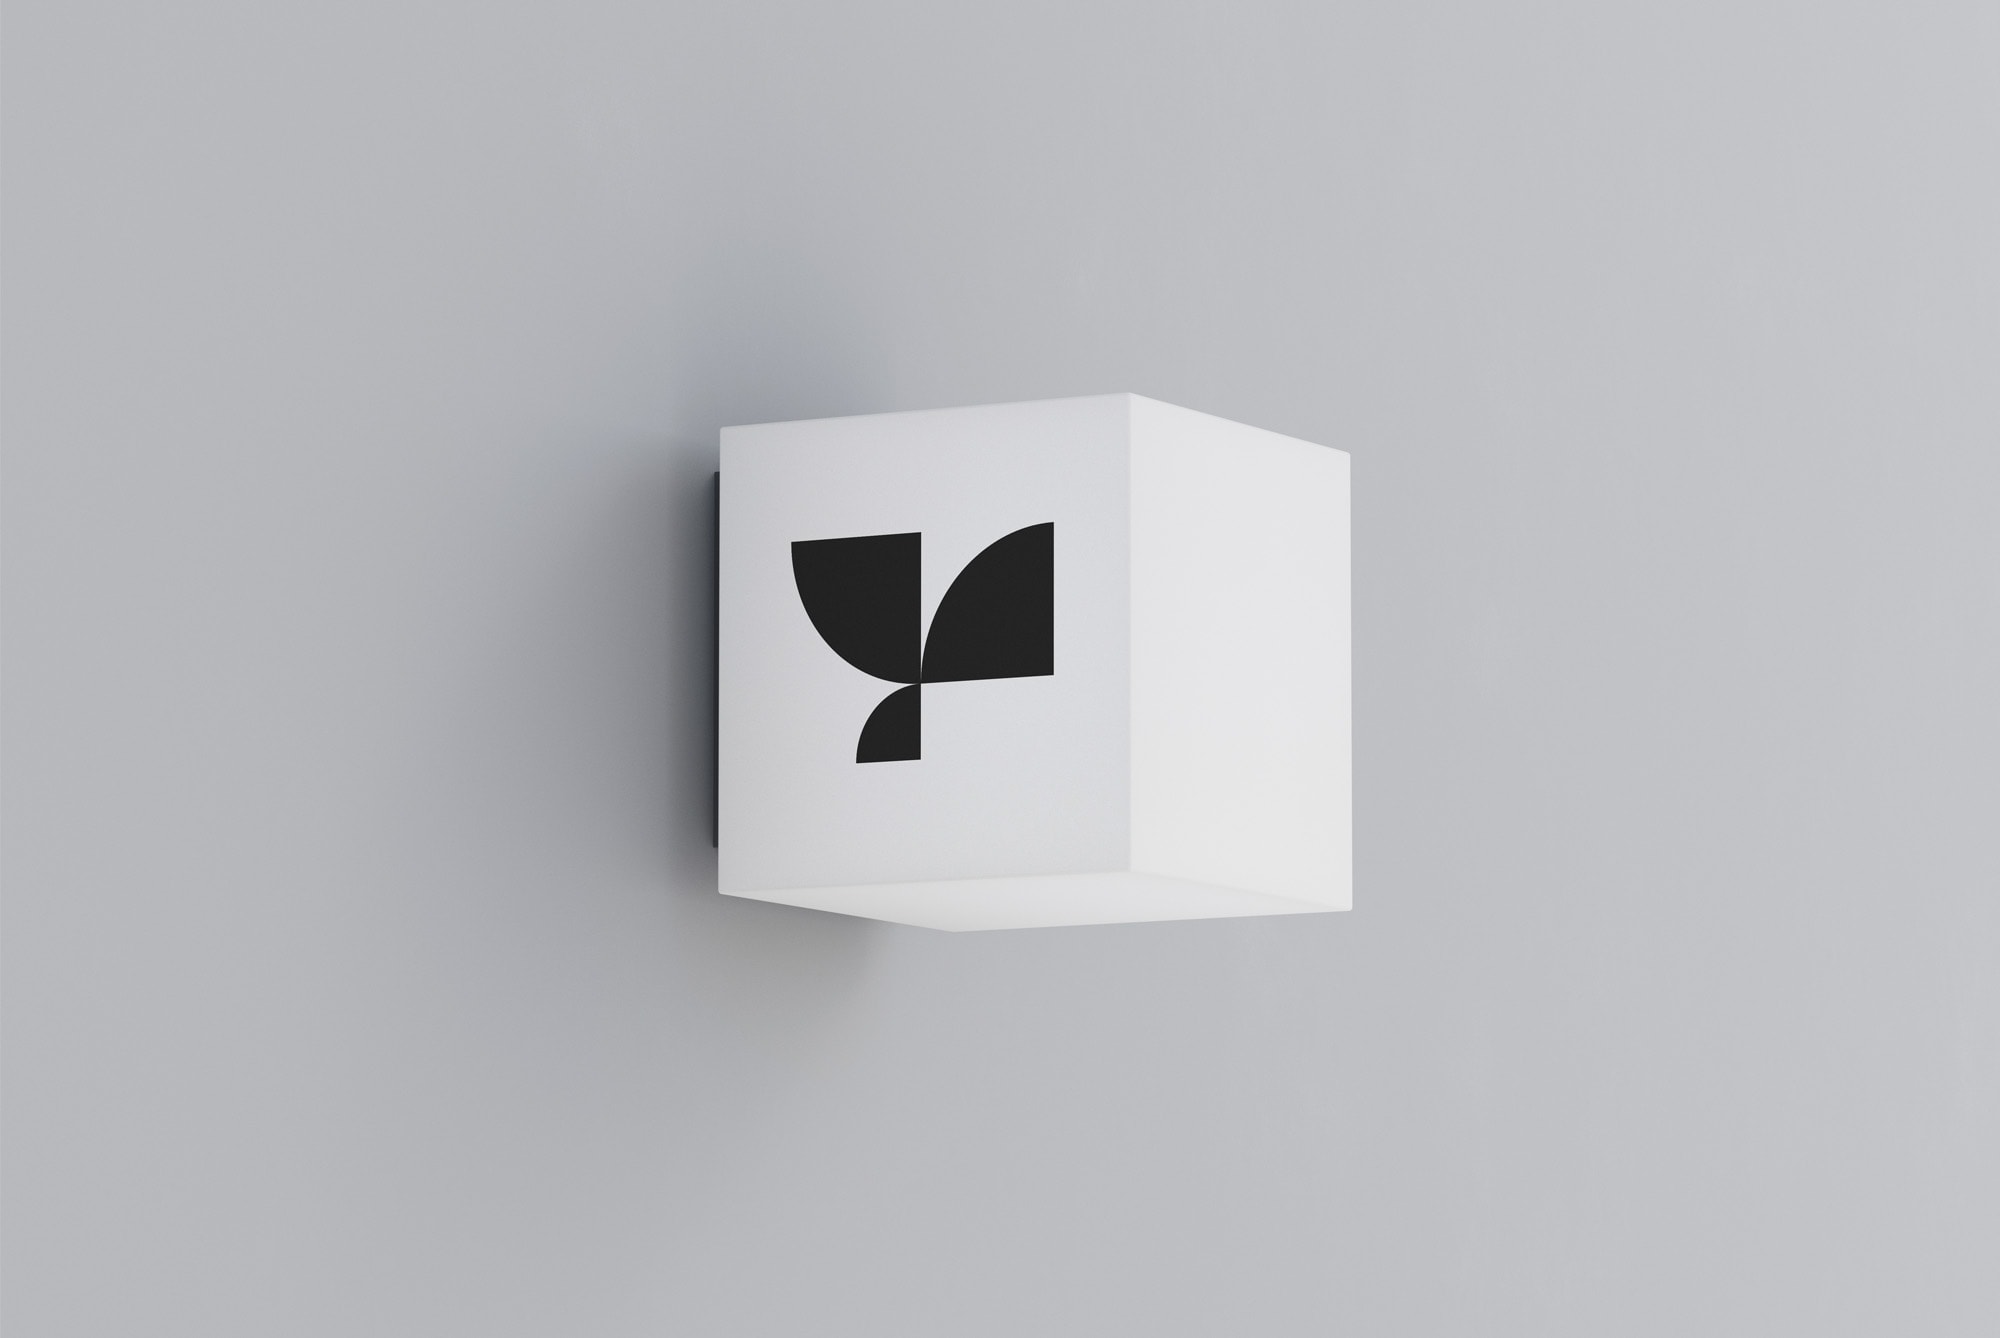 Minimalist logo mockup on white cube against a grey wall, ideal for presenting clean graphic designs or brand identities to clients.